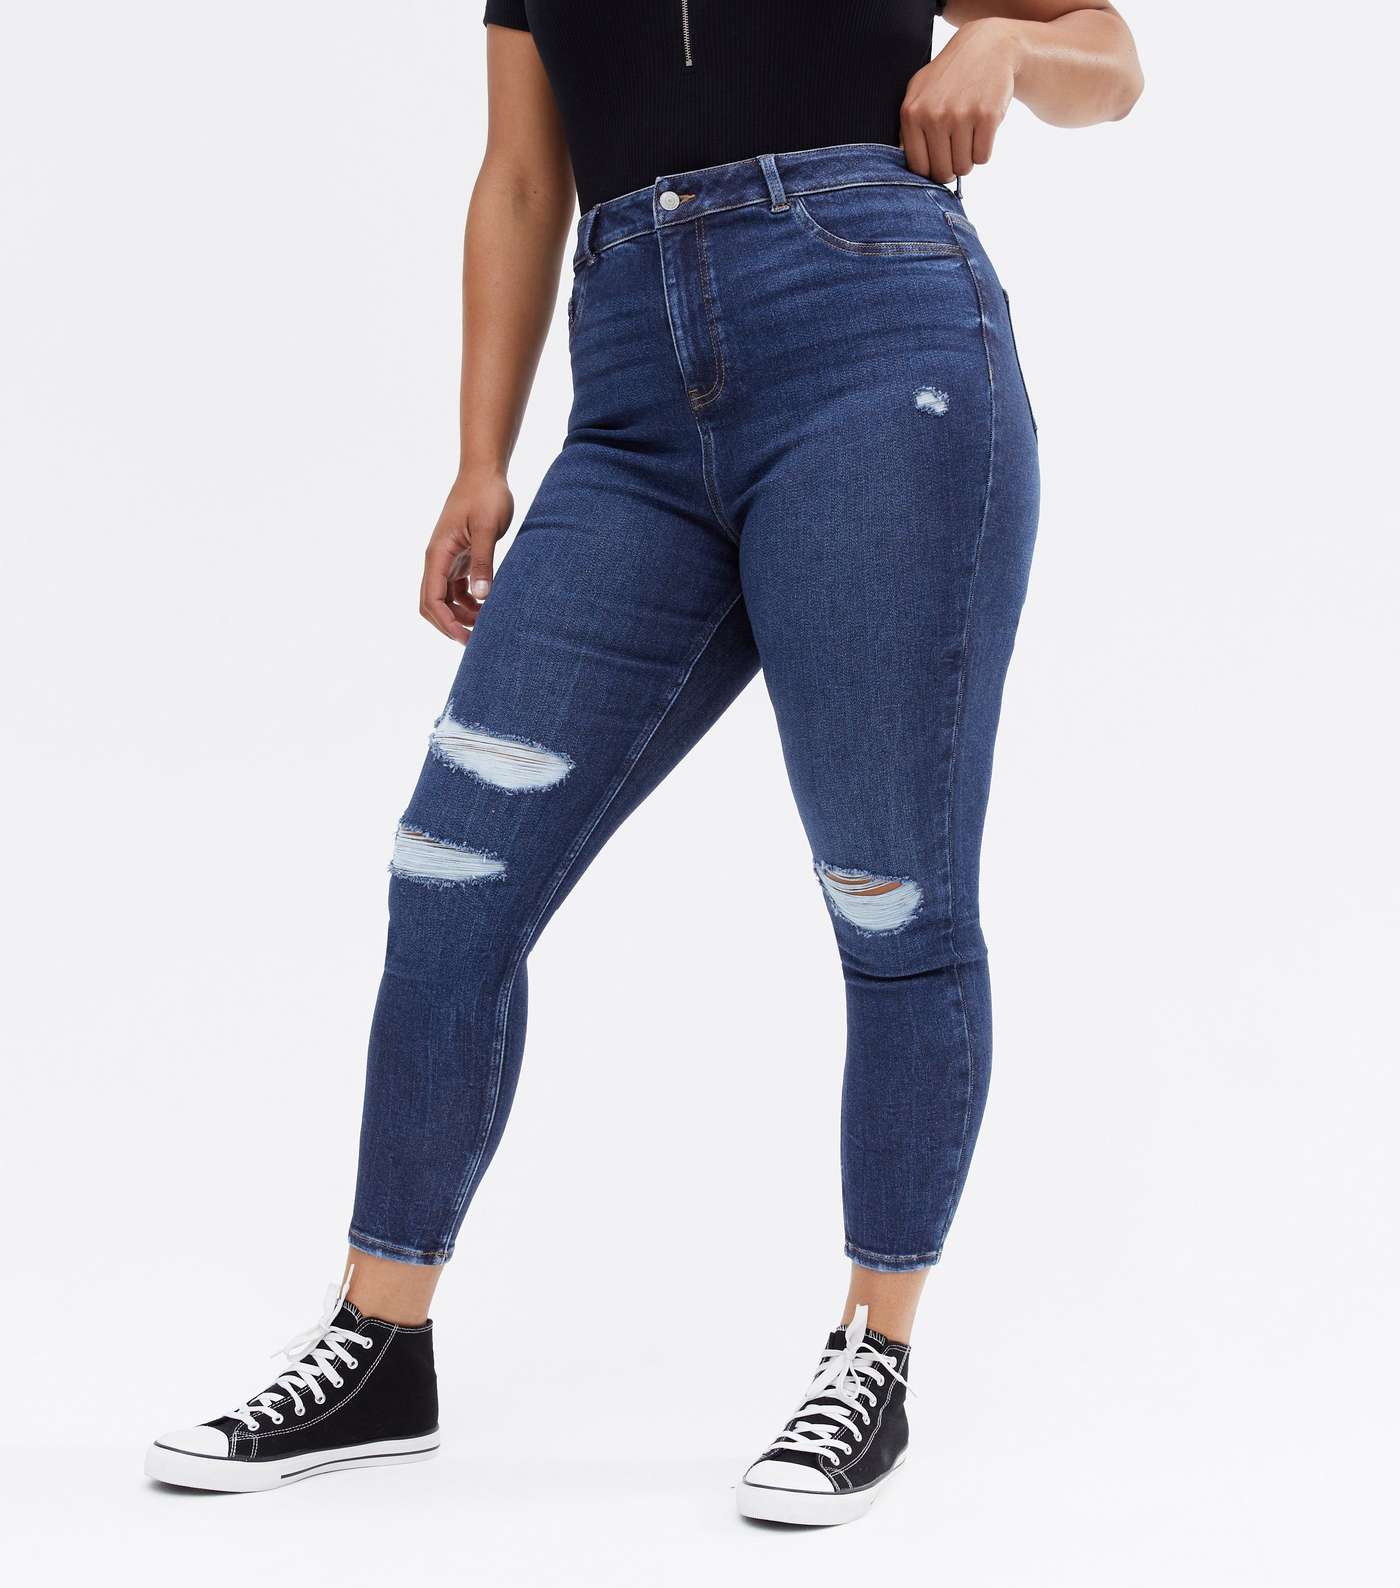 Curves Blue Rinse Wash Ripped Knee High Waist Hallie Super Skinny Jeans Image 2